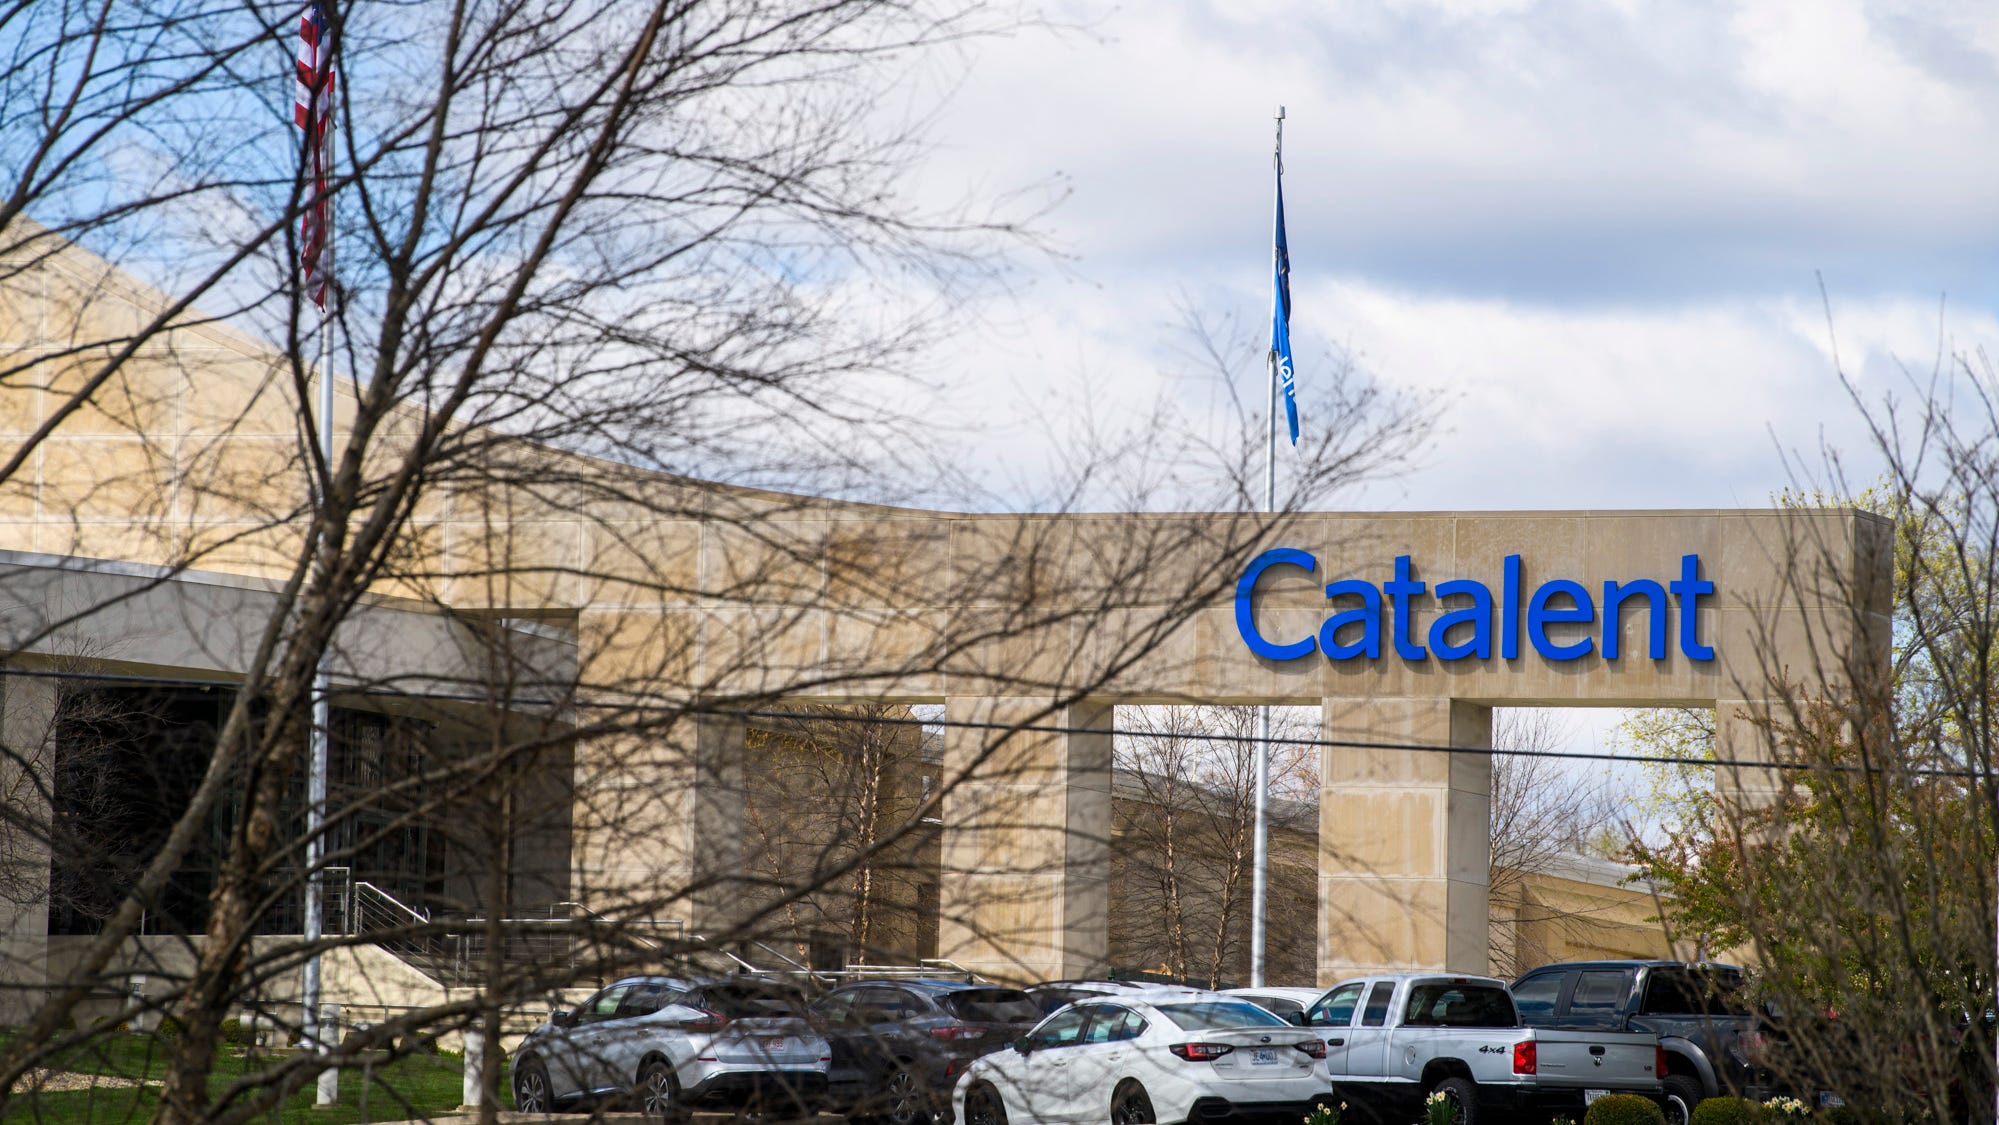 Catalent Bloomington laying off workers due to declining demand